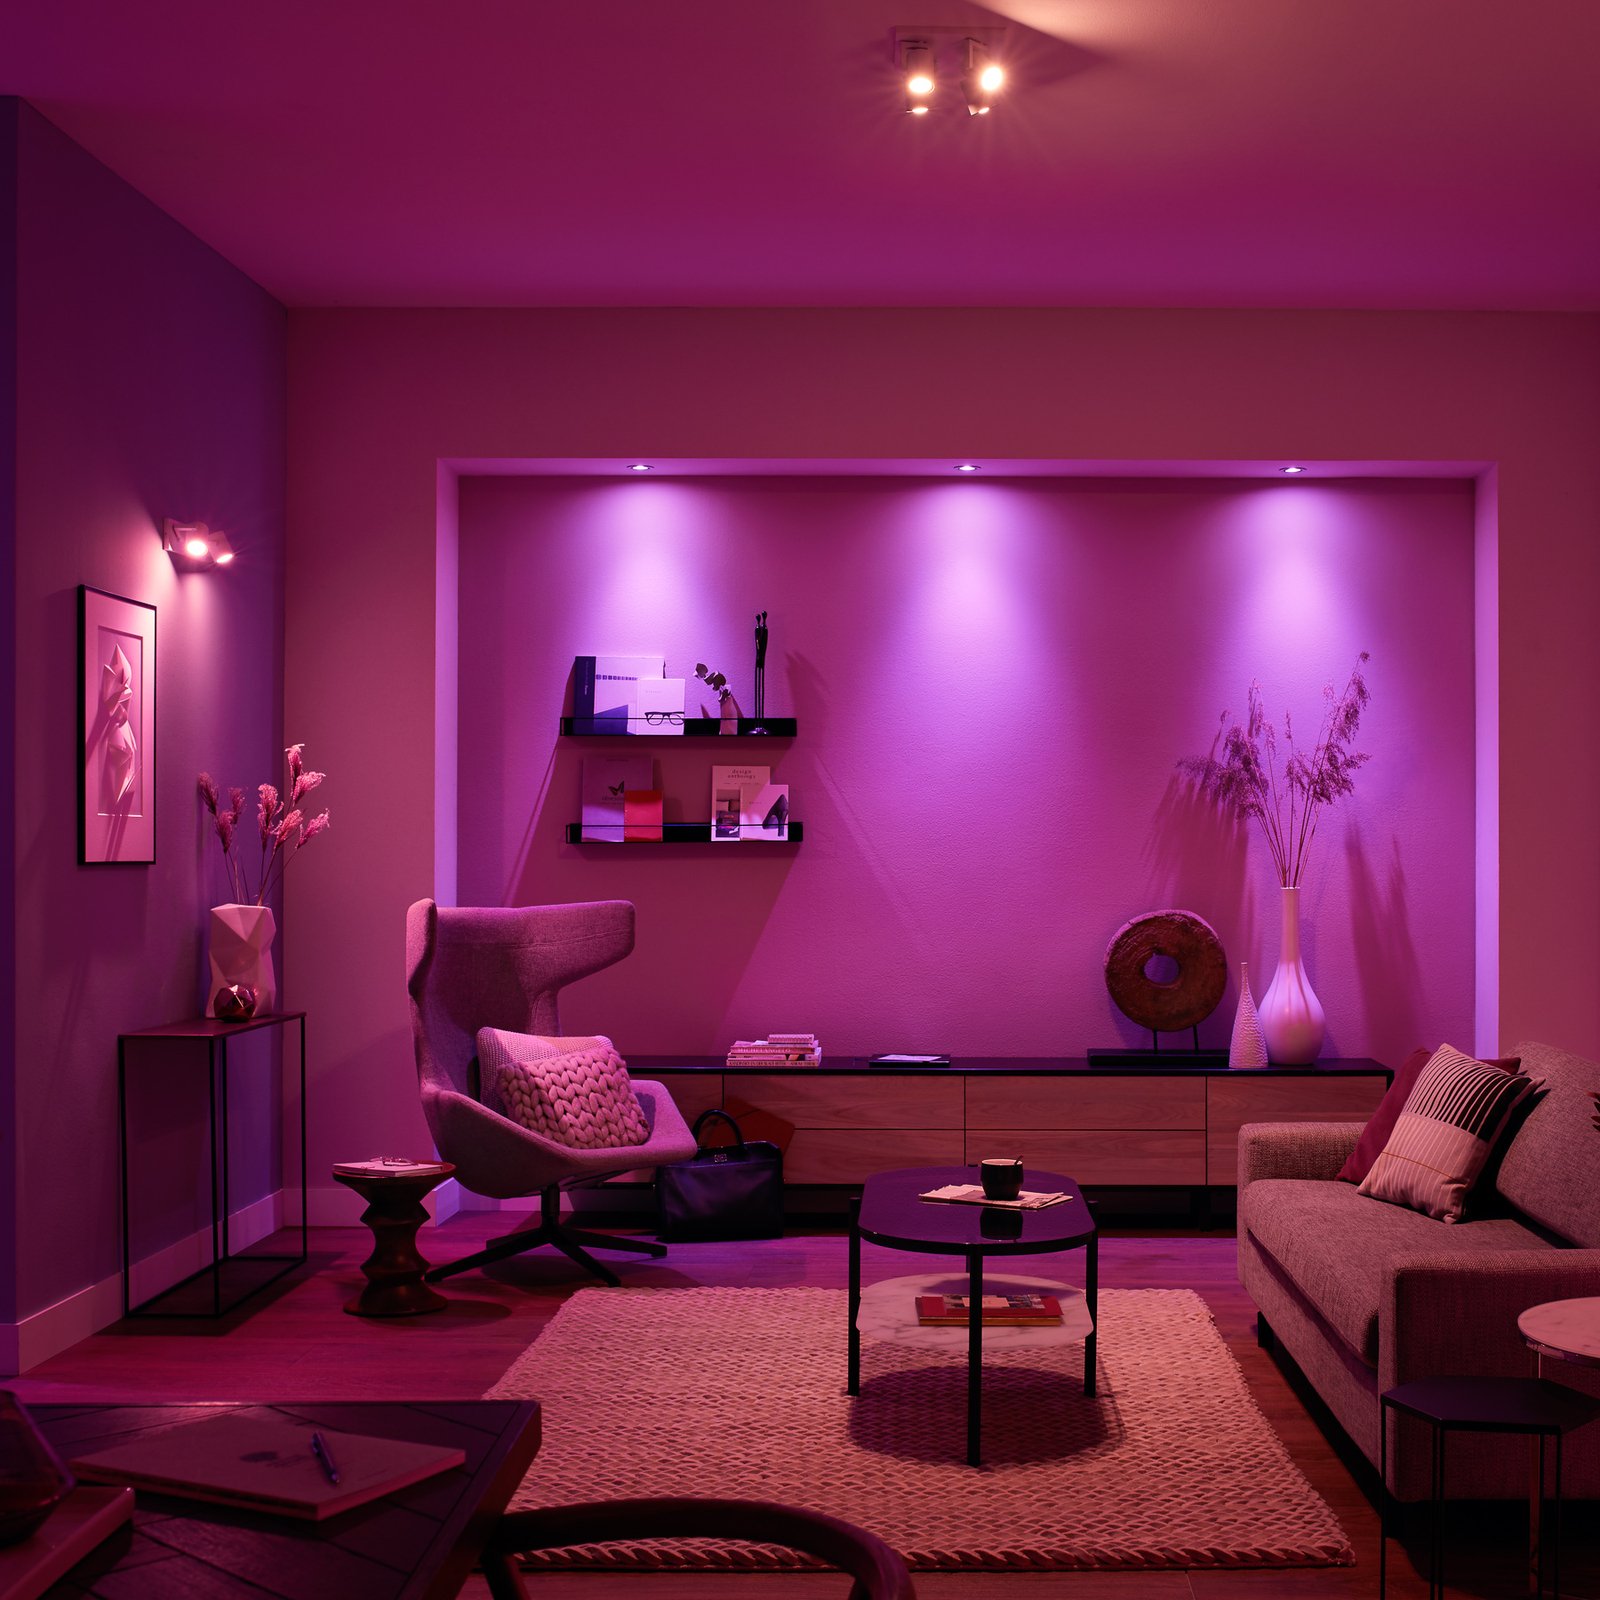 Philips Hue White & Color Ambiance 4,3W GU10, 2